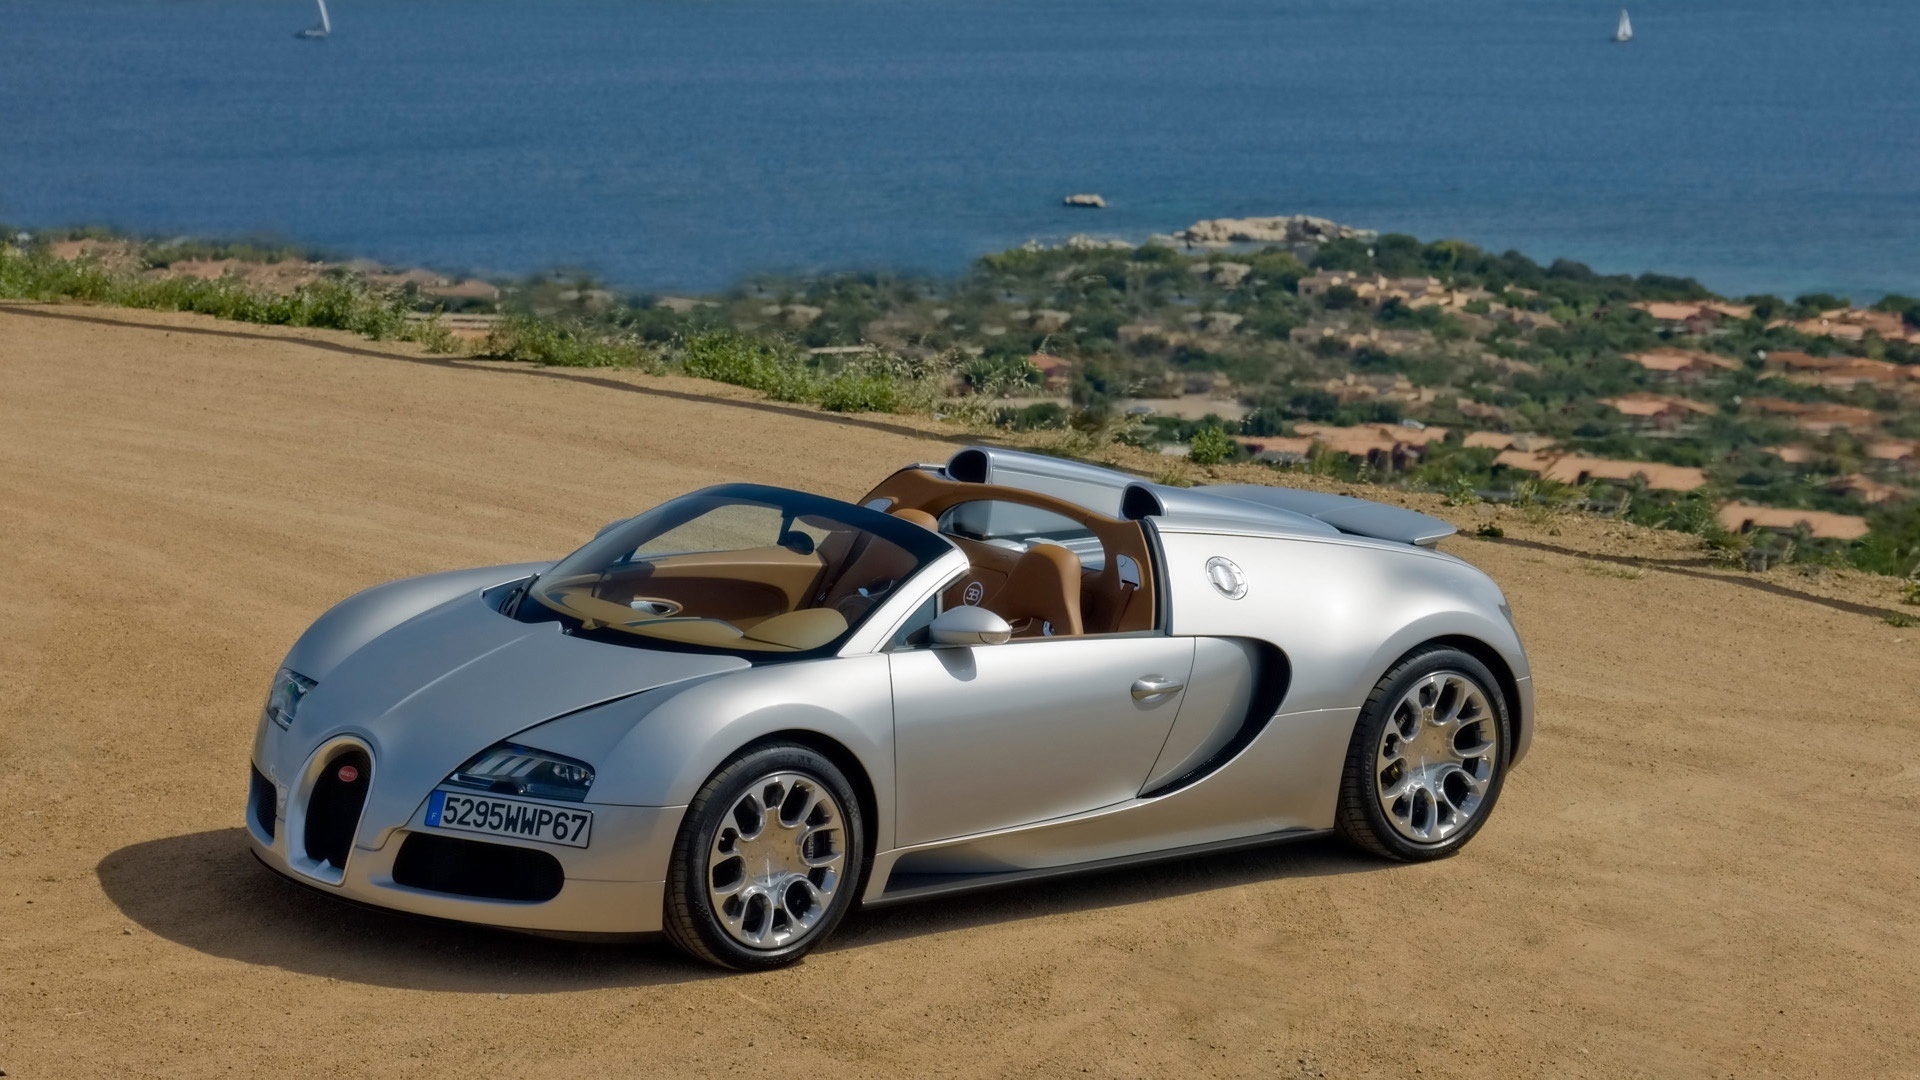 Bugatti Veyron 16.4 Grand Sport 2010 in Sardinia - Front And Side Panorama for 1920 x 1080 HDTV 1080p resolution